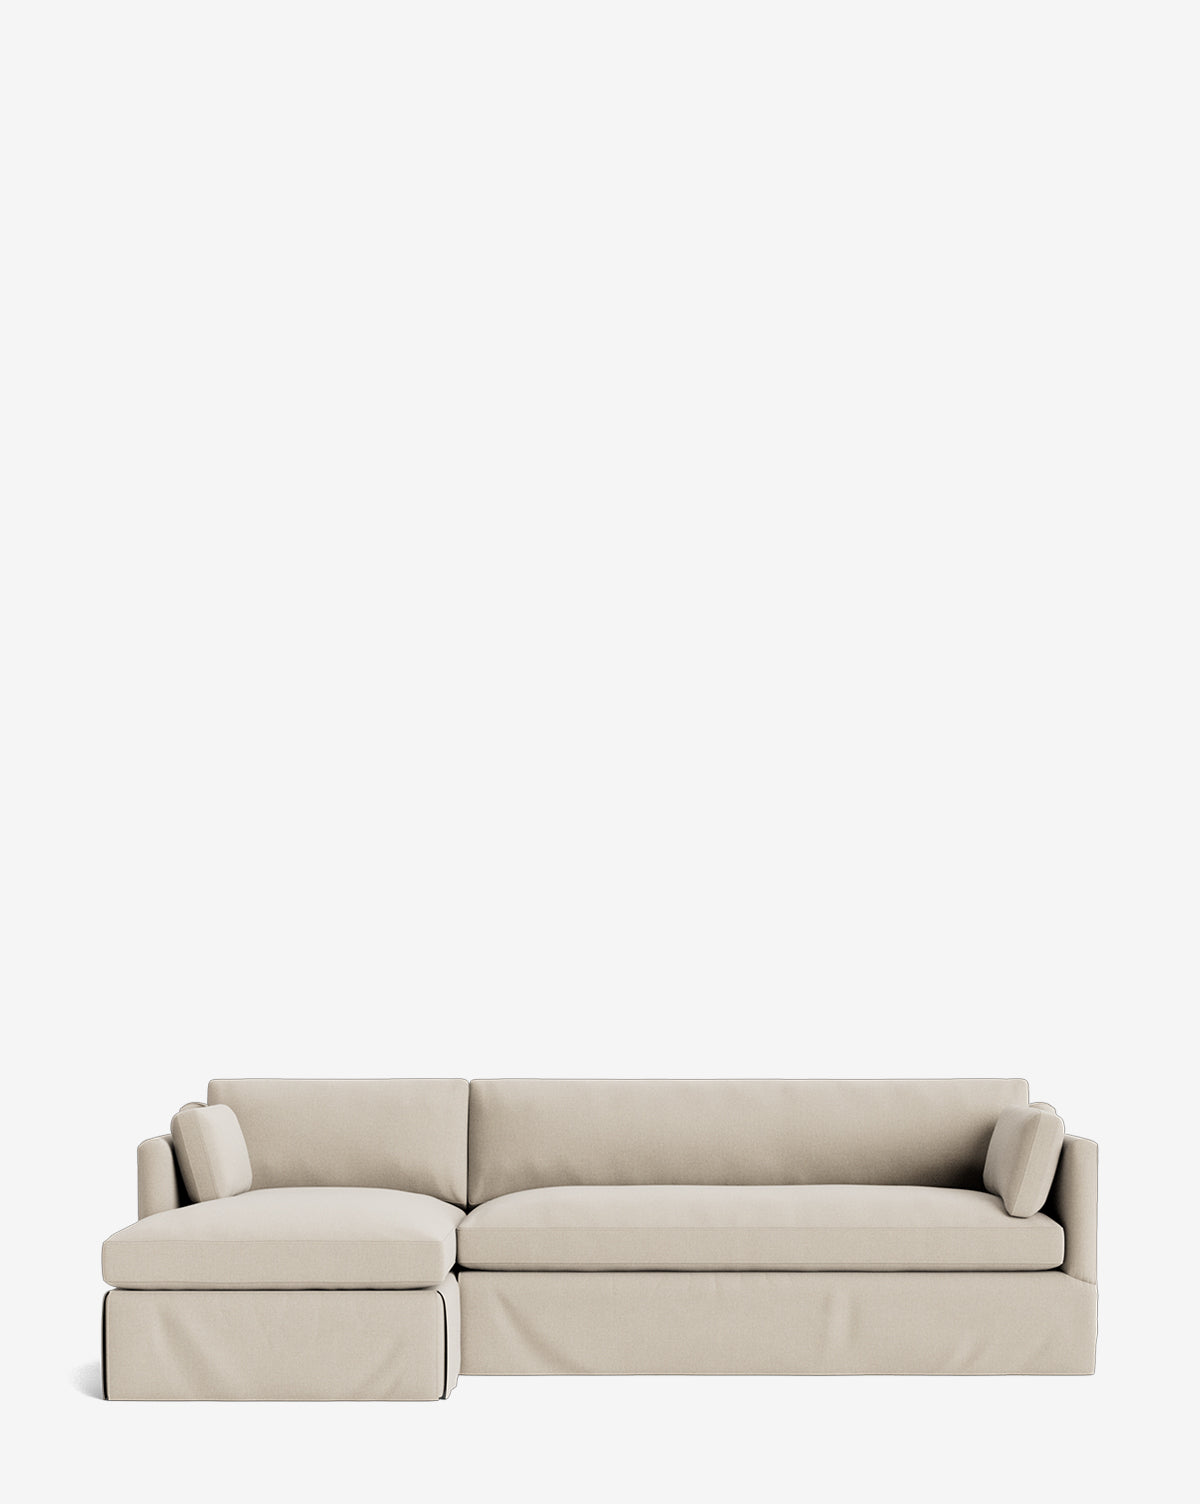 Rowe Fine Furniture, Haverford Slipcover Sectional